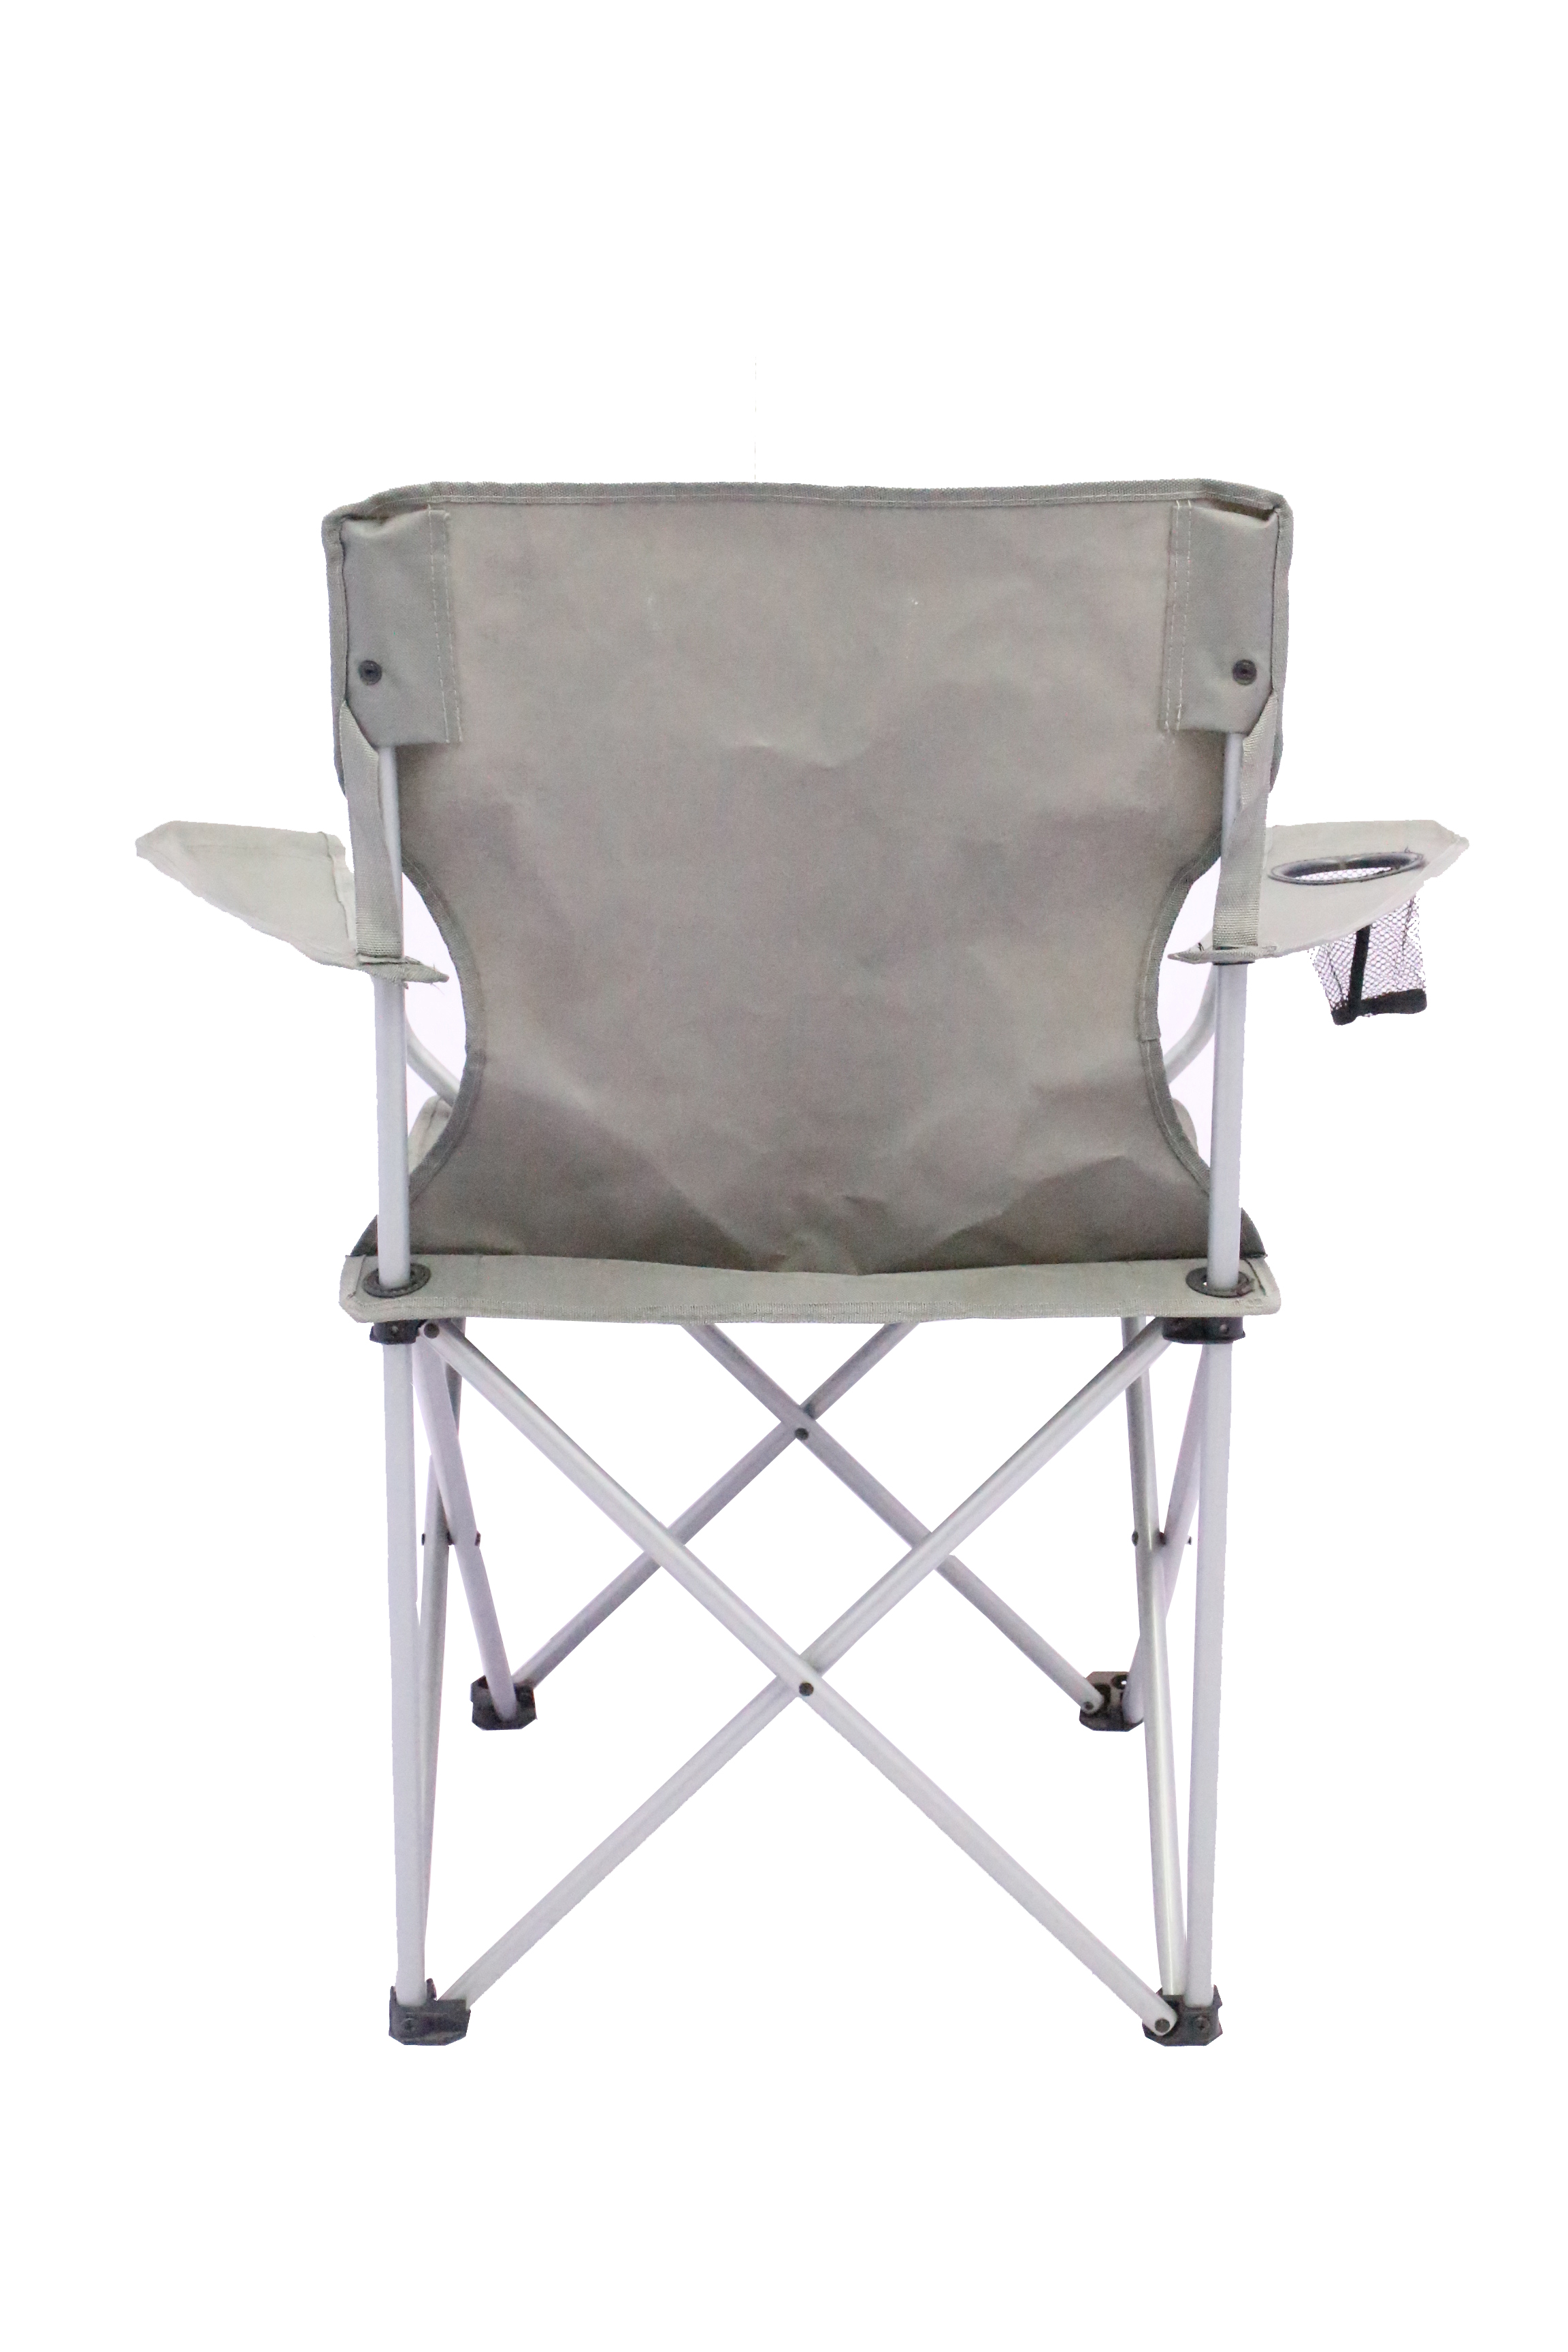 Ozark Trail Quad Folding Camp Chair 2 Pack,with Mesh Cup Holder - image 14 of 17